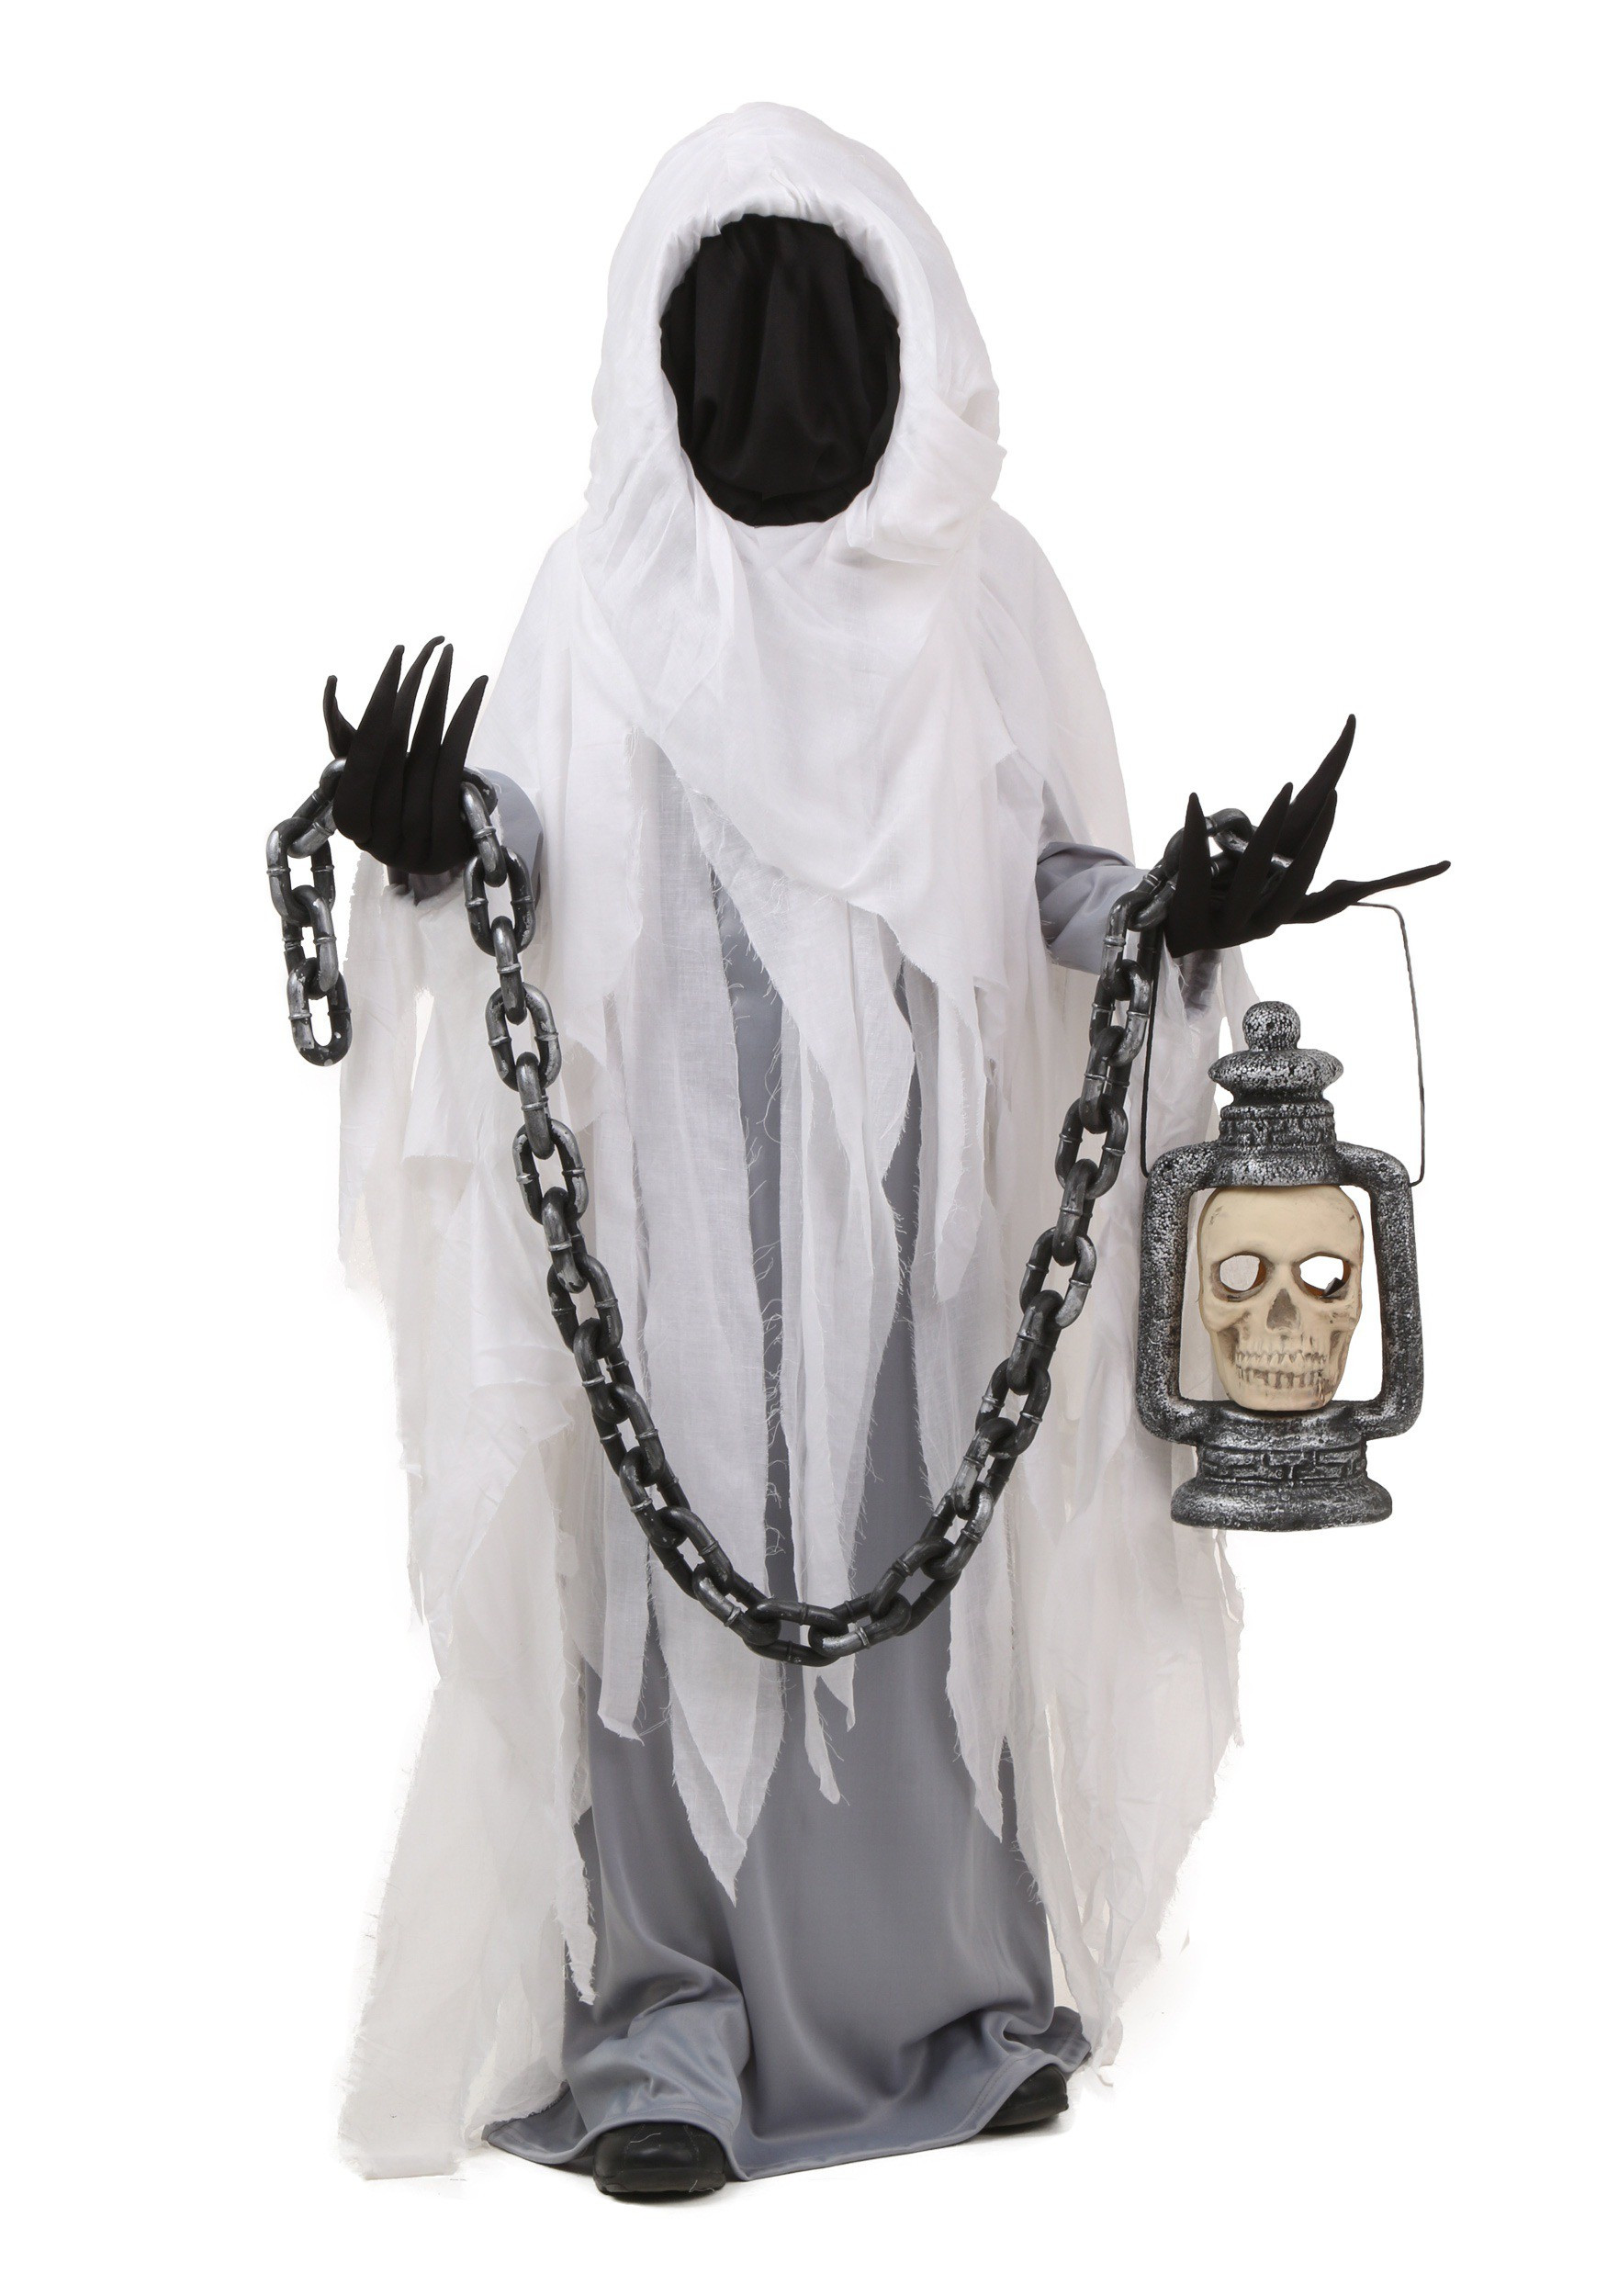 DIY Ghost Costume
 Child Spooky Ghost Costume